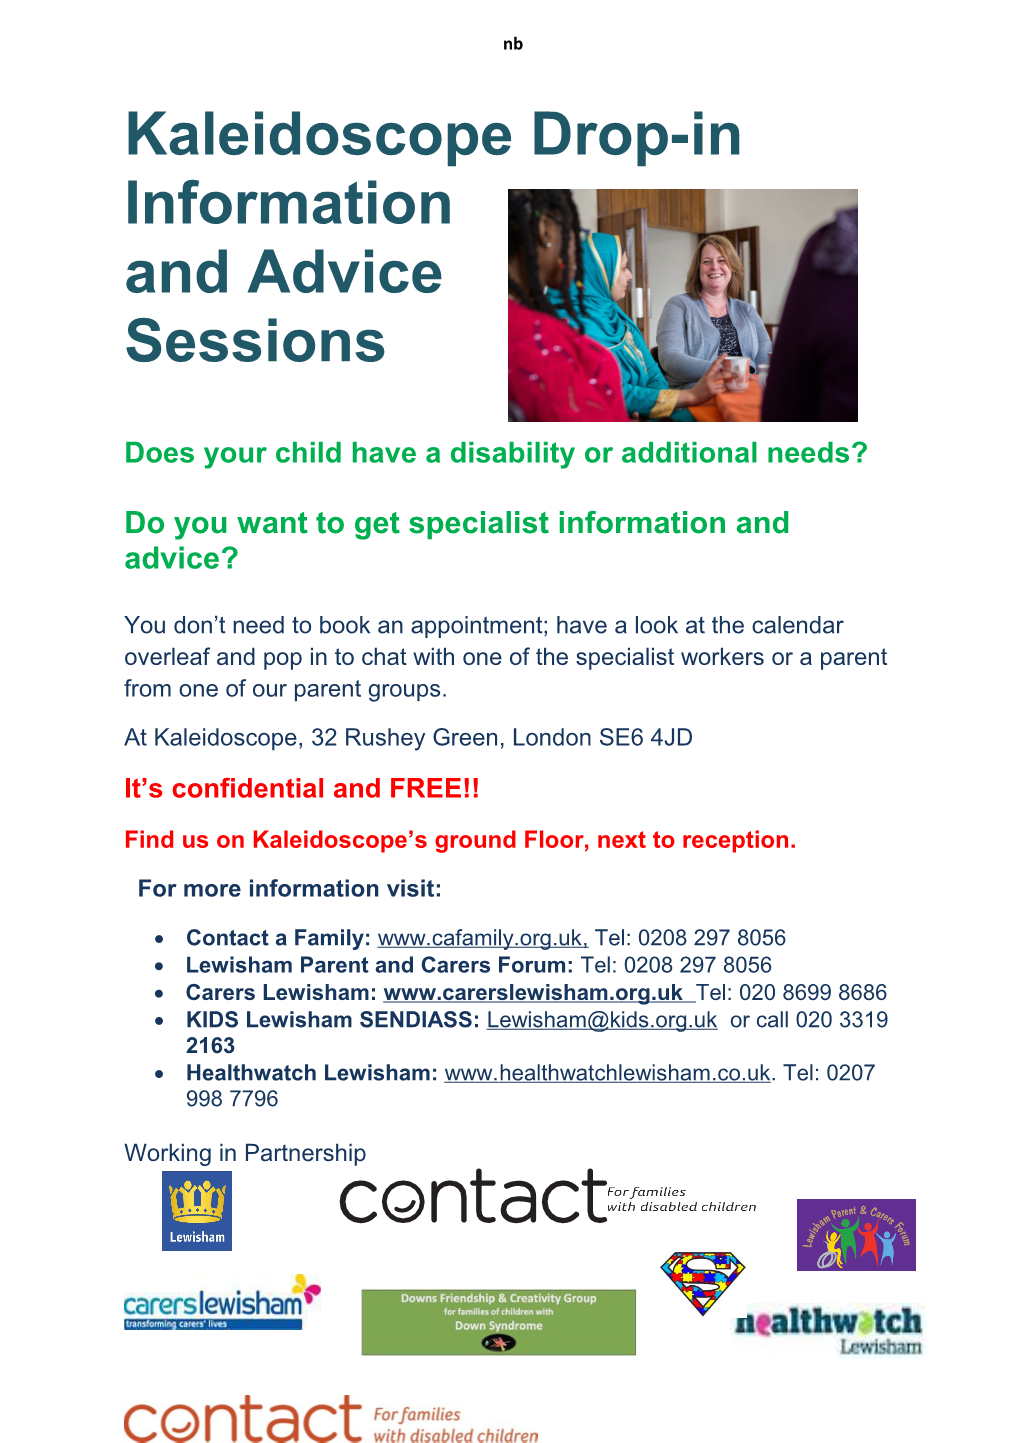 Does Your Child Have a Disability Or Additional Needs?